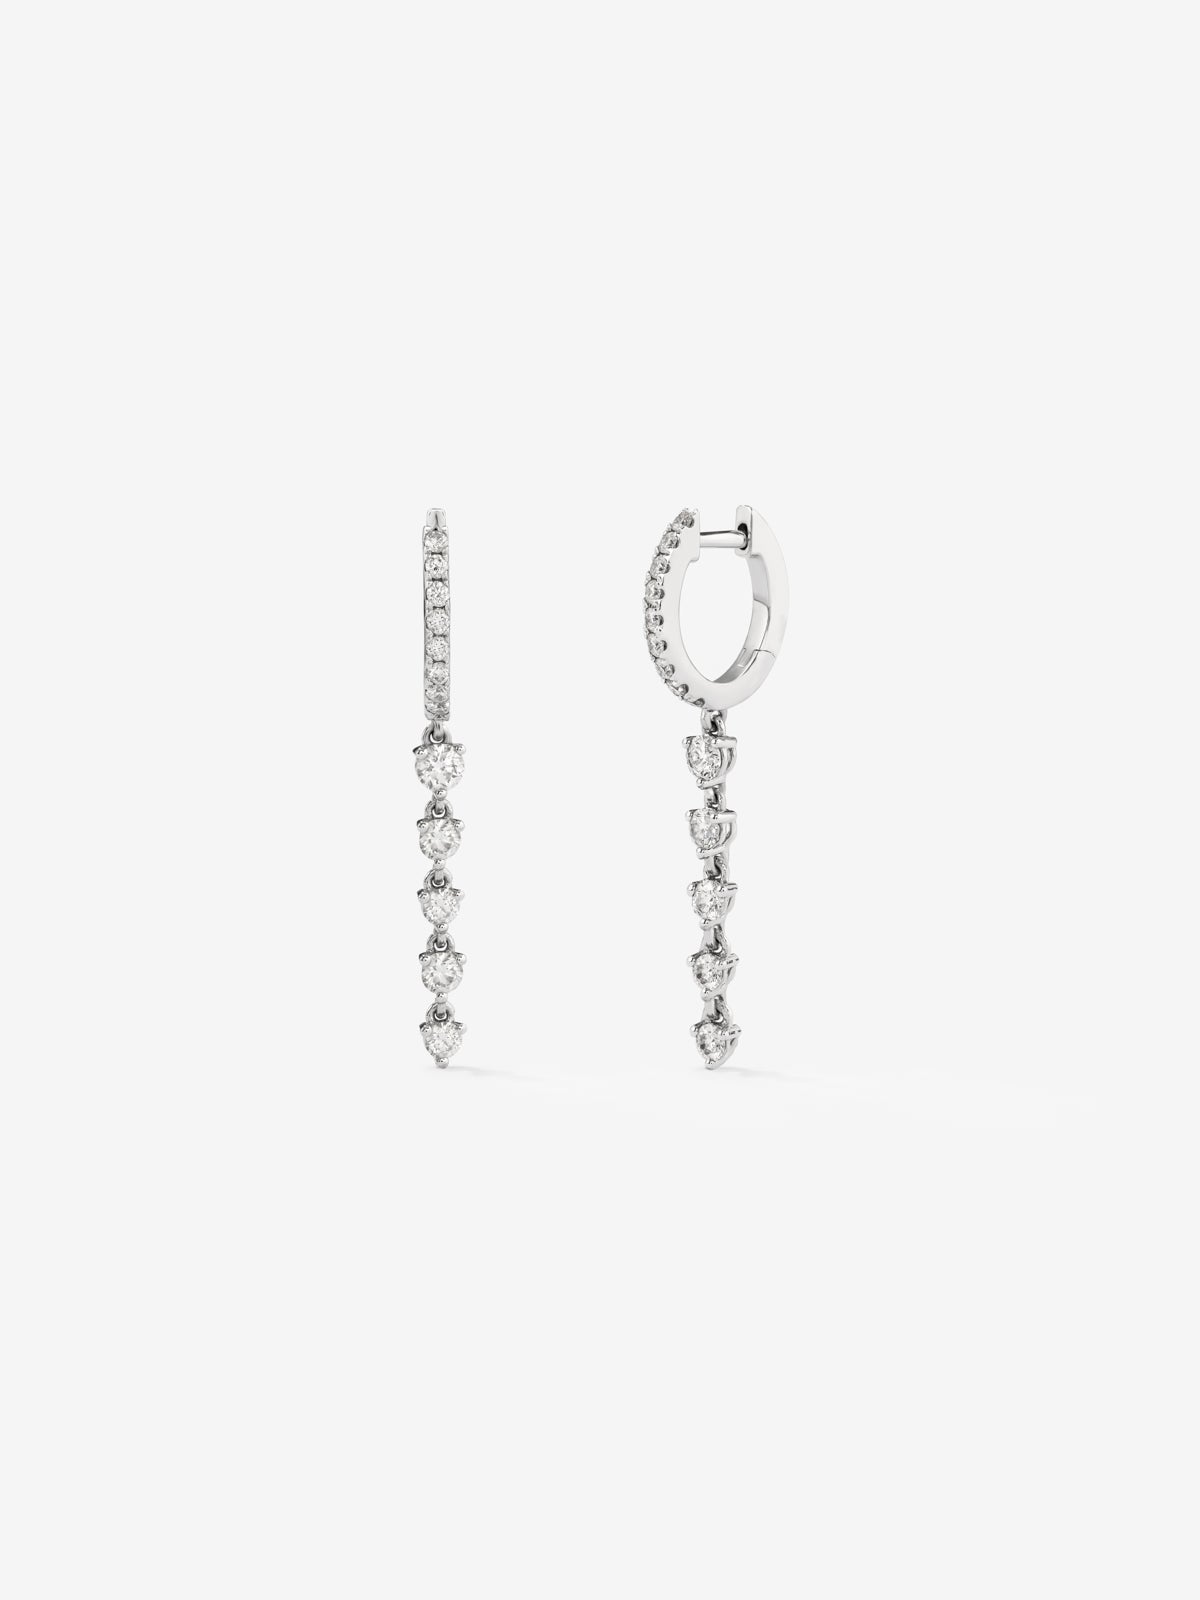 18K White Gold Gold Earrings with Diamonds